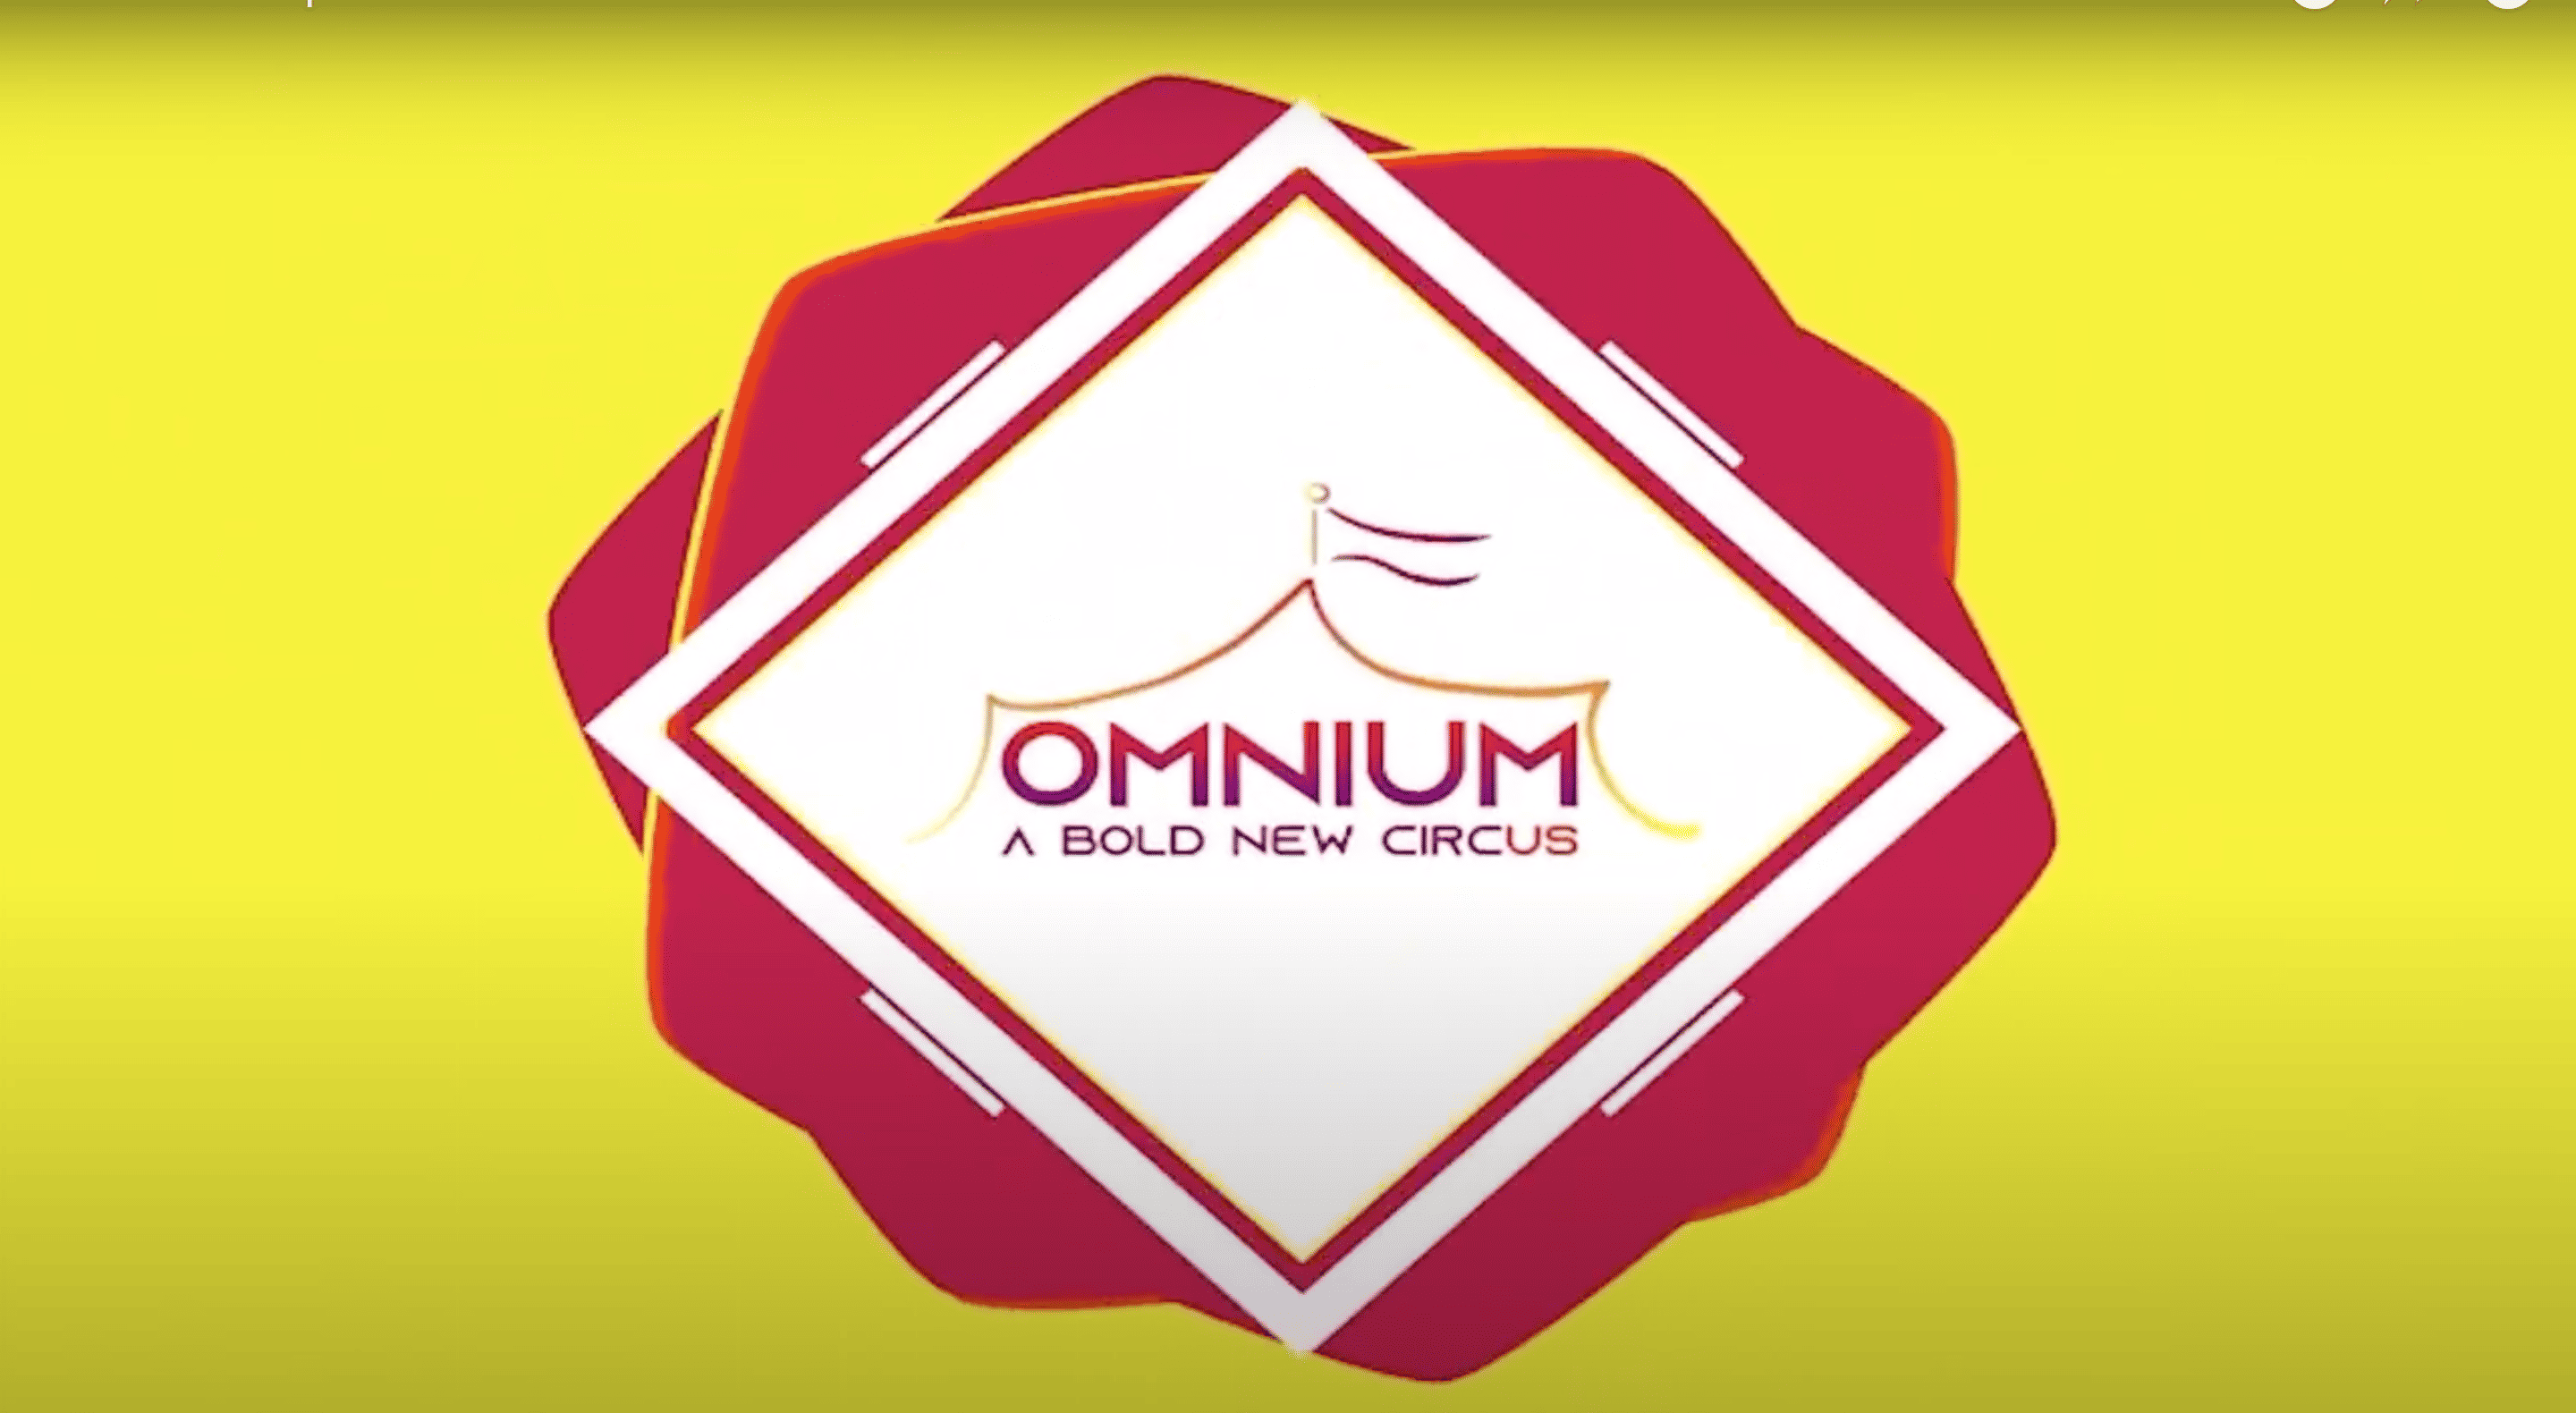 "Omnium a Bold New Circus" logo in diamond shape with red background